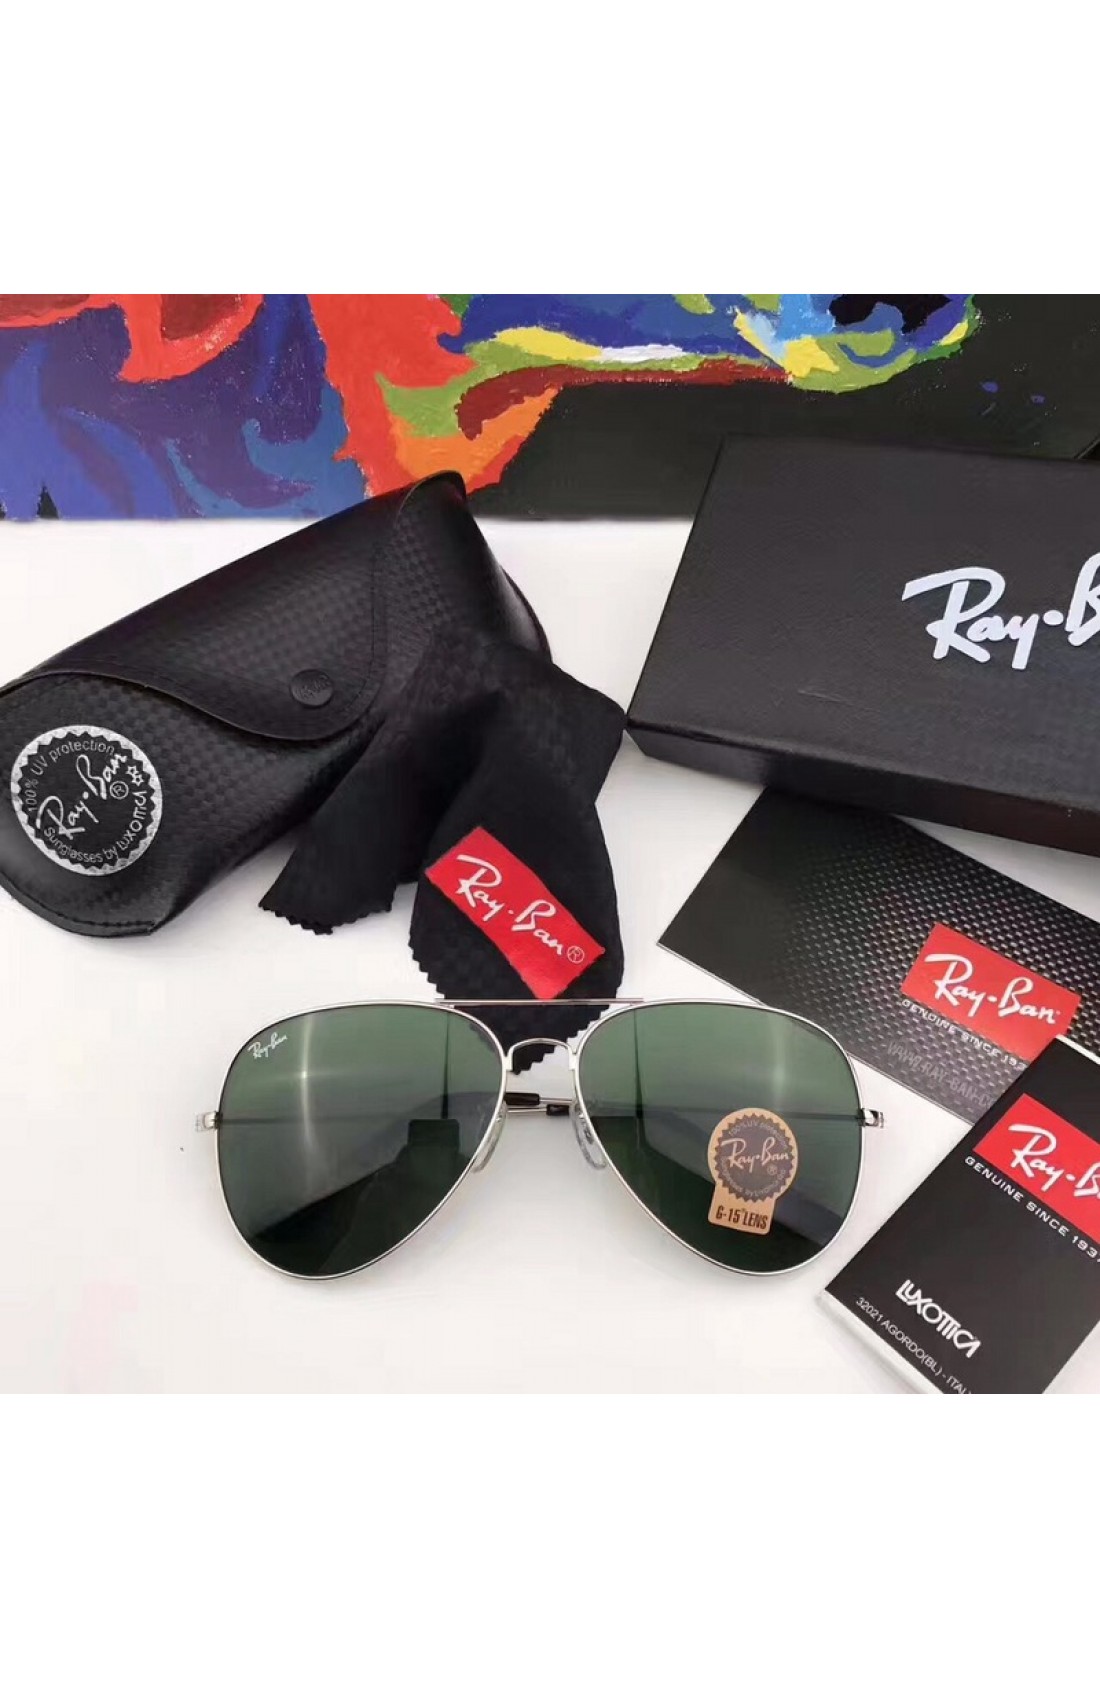 ray bans for sale cheap \u003e Up to 60% OFF 